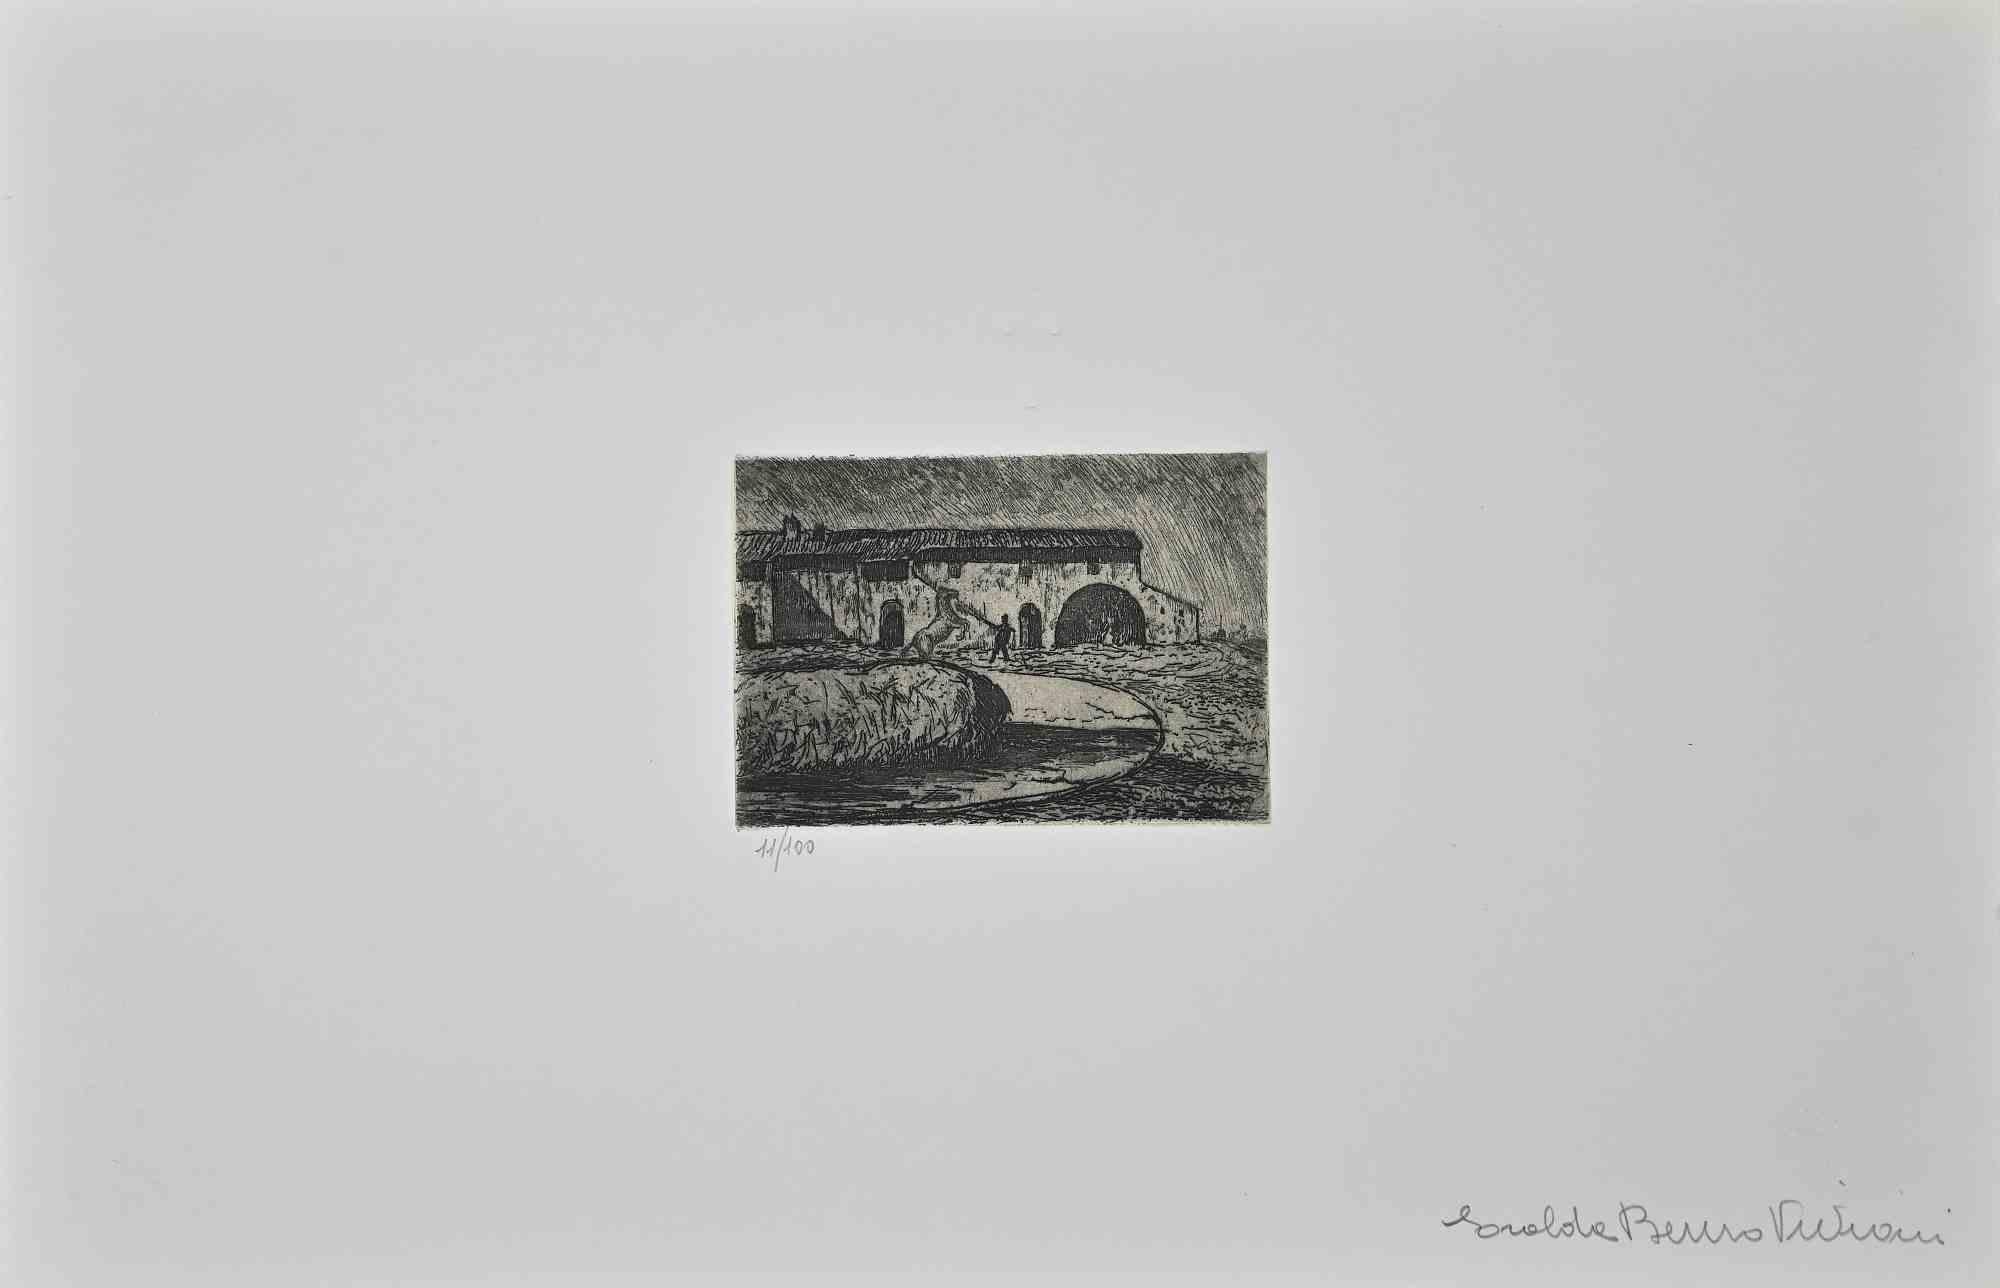 Il fattore is an original modern artwork realized in the 1920s by Giuseppe Viviani (Agnano, San Giuliano Terme, 1898 – Pisa, 1965).

Original B/W Etching on paper. 

Numbered on the lower left corner: 11/100.

Edition of 100 numbered and signed by